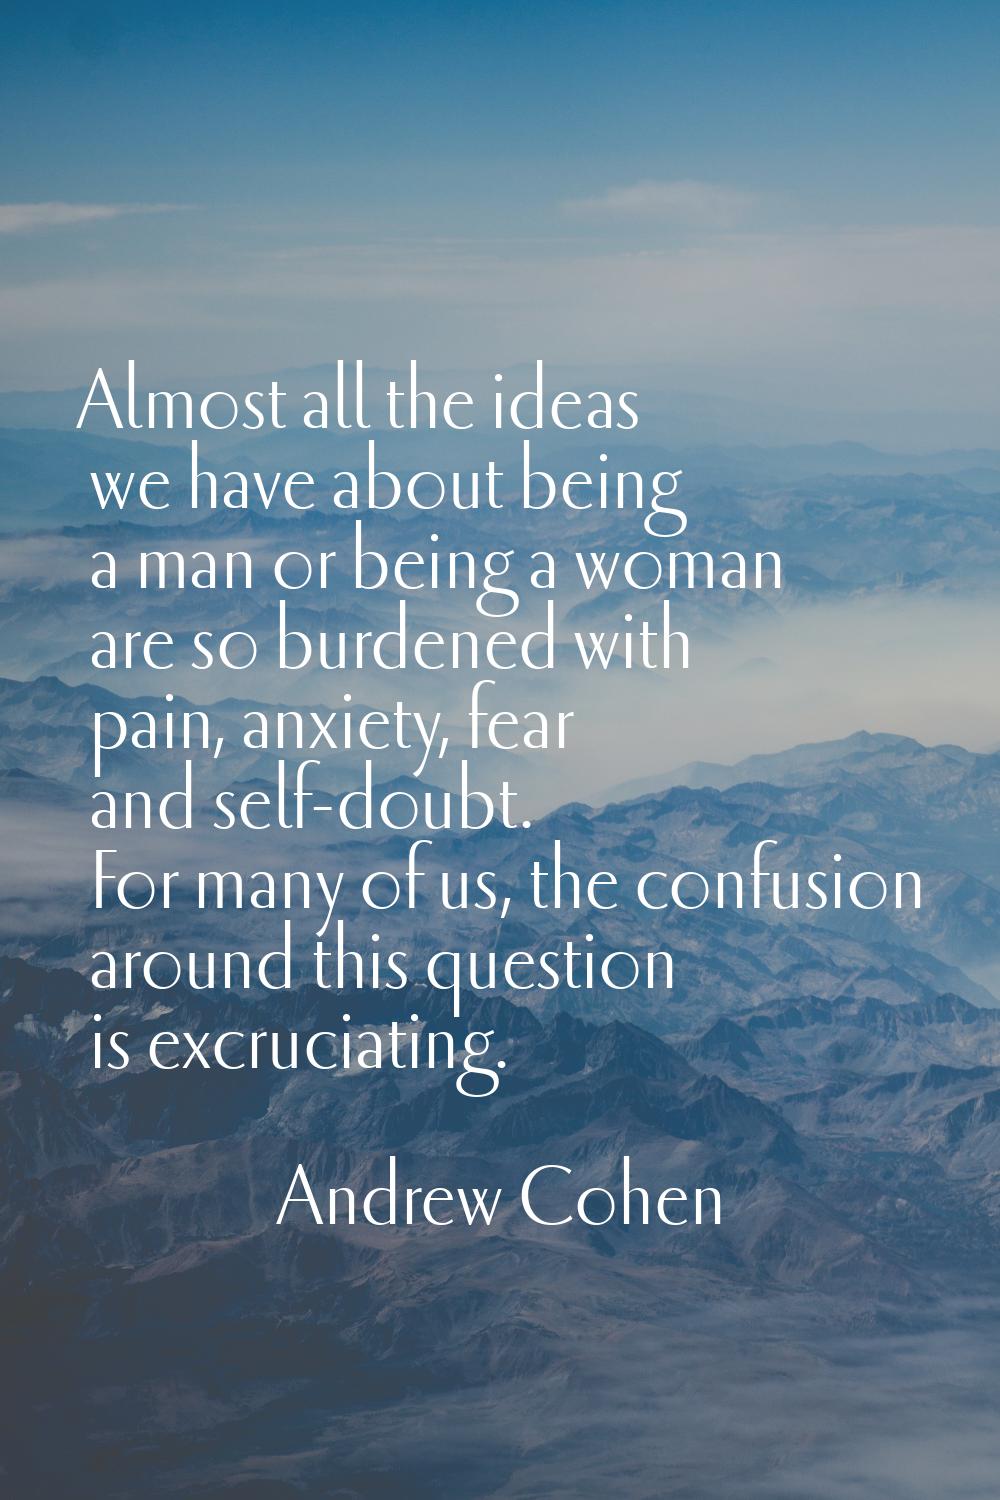 Almost all the ideas we have about being a man or being a woman are so burdened with pain, anxiety,